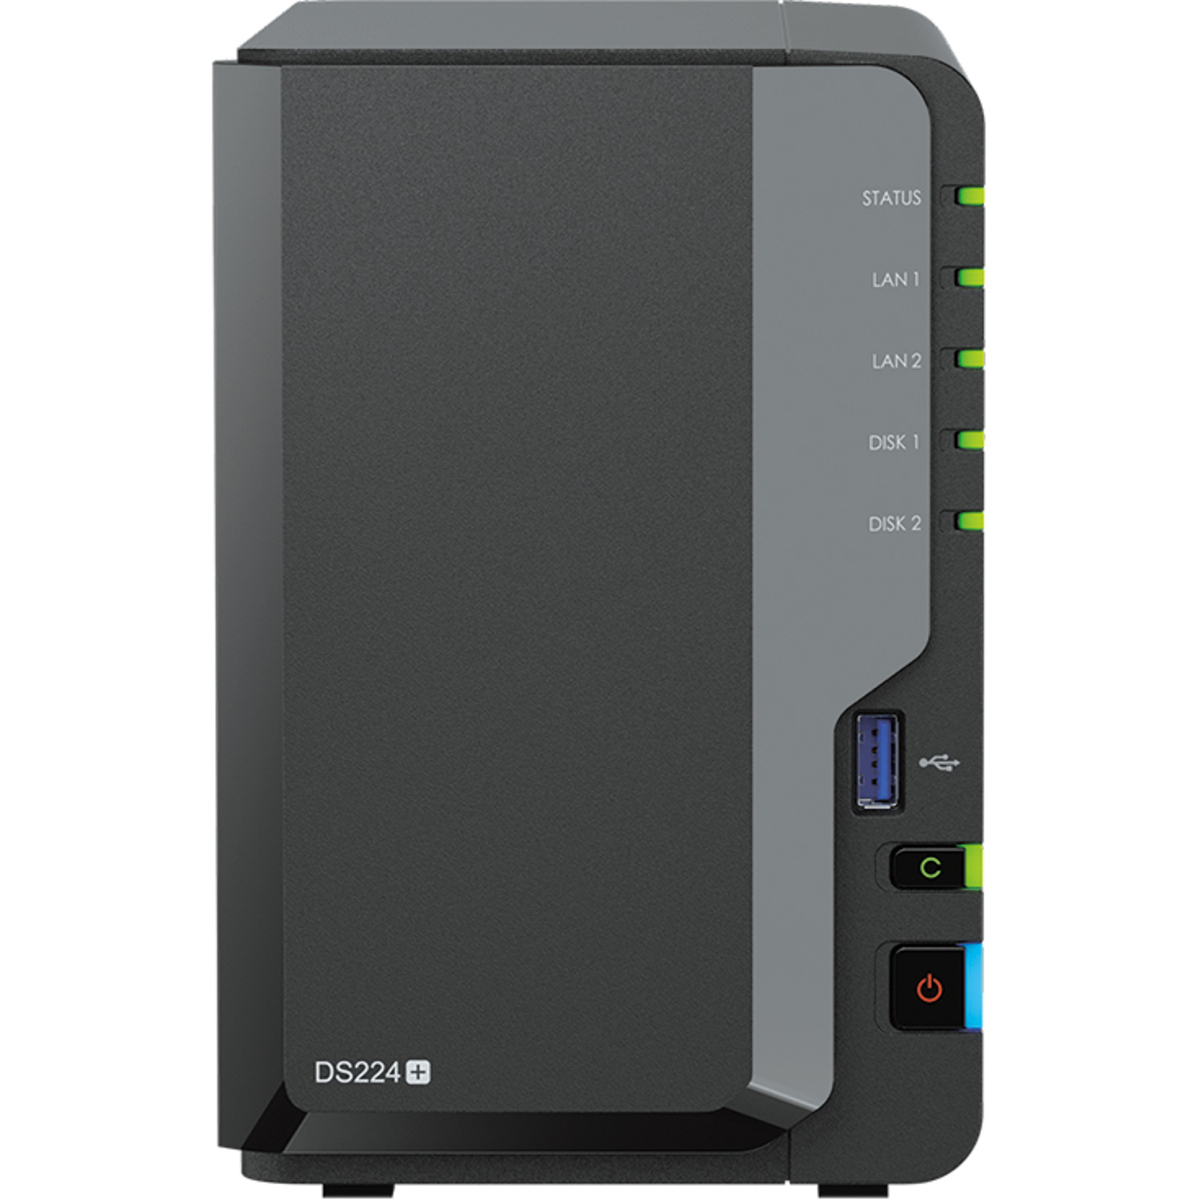 Synology DiskStation DS224+ 8tb 2-Bay Desktop Personal / Basic Home / Small Office NAS - Network Attached Storage Device 2x4tb Toshiba MN Series MN08ADA400E 3.5 7200rpm SATA 6Gb/s HDD NAS Class Drives Installed - Burn-In Tested - ON SALE - FREE RAM UPGRADE DiskStation DS224+